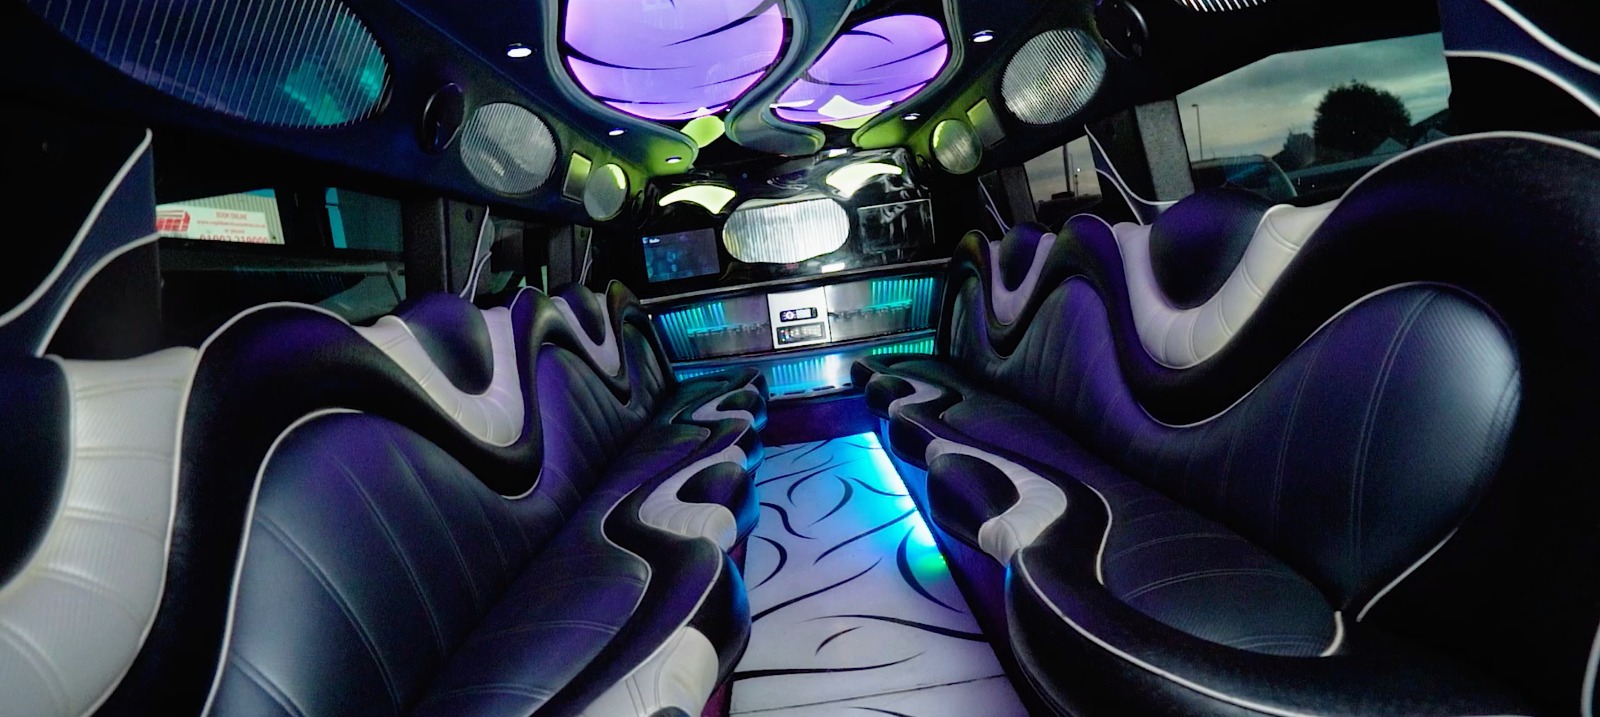 Hummer Limousine Interior (Prom Limo Hire)